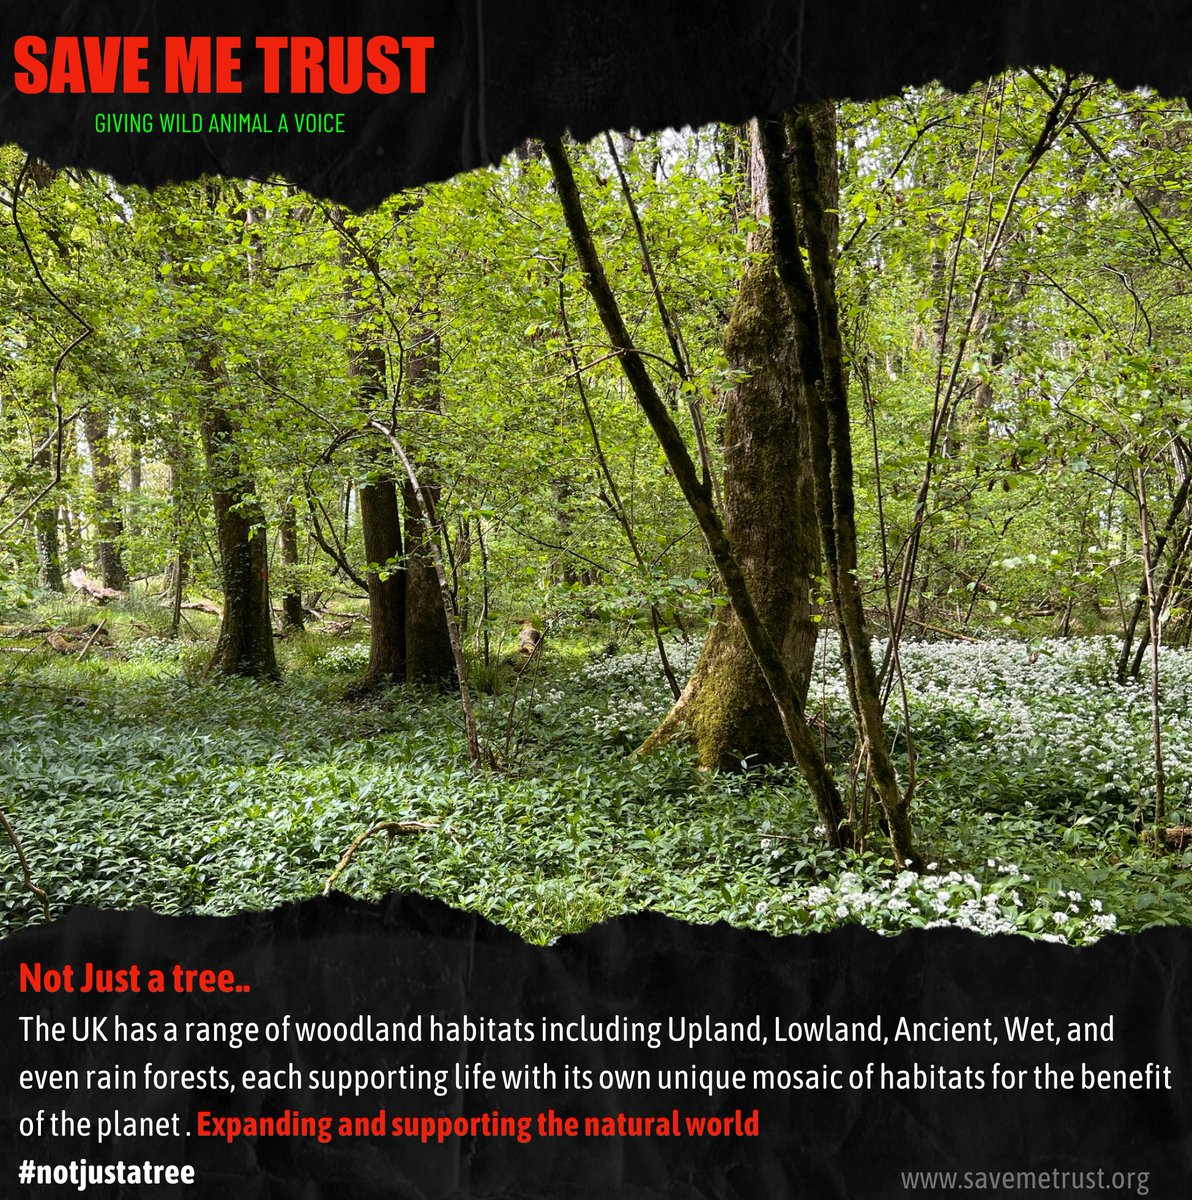 Not Just a tree.. The UK has a range of woodland habitats including Upland, Lowland, Ancient, Wet, and even rain forests, each supporting life with its own unique mosaic of habitats for the benefit of the planet . Expanding and supporting the natural world #notjustatree